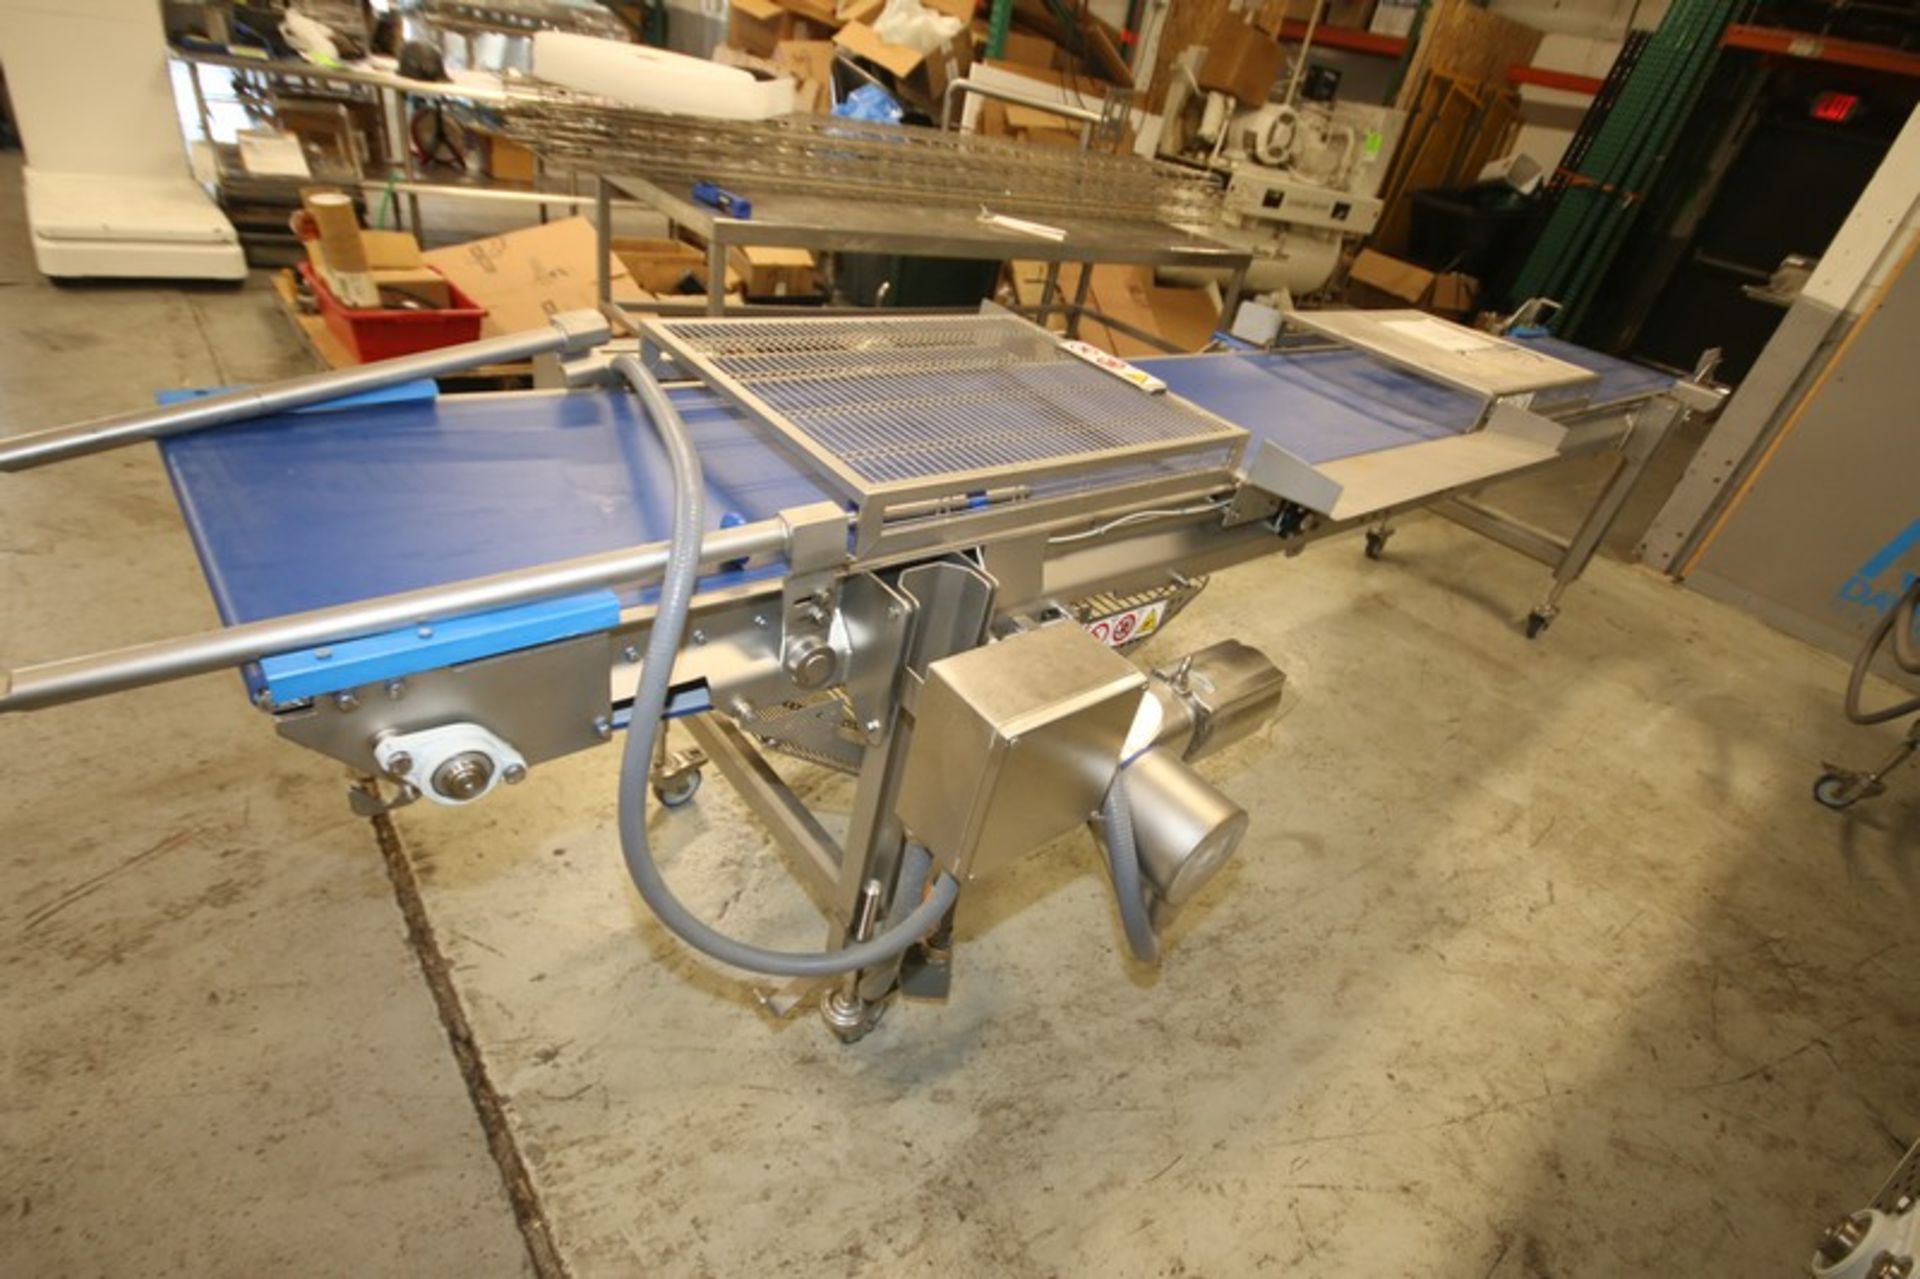 2019 Alimec Aprox. 159" L x 19 1/2" W x 34" H S/S Belt Conveyor, SN 813-55, with Bauer S/S Drive - Image 4 of 6